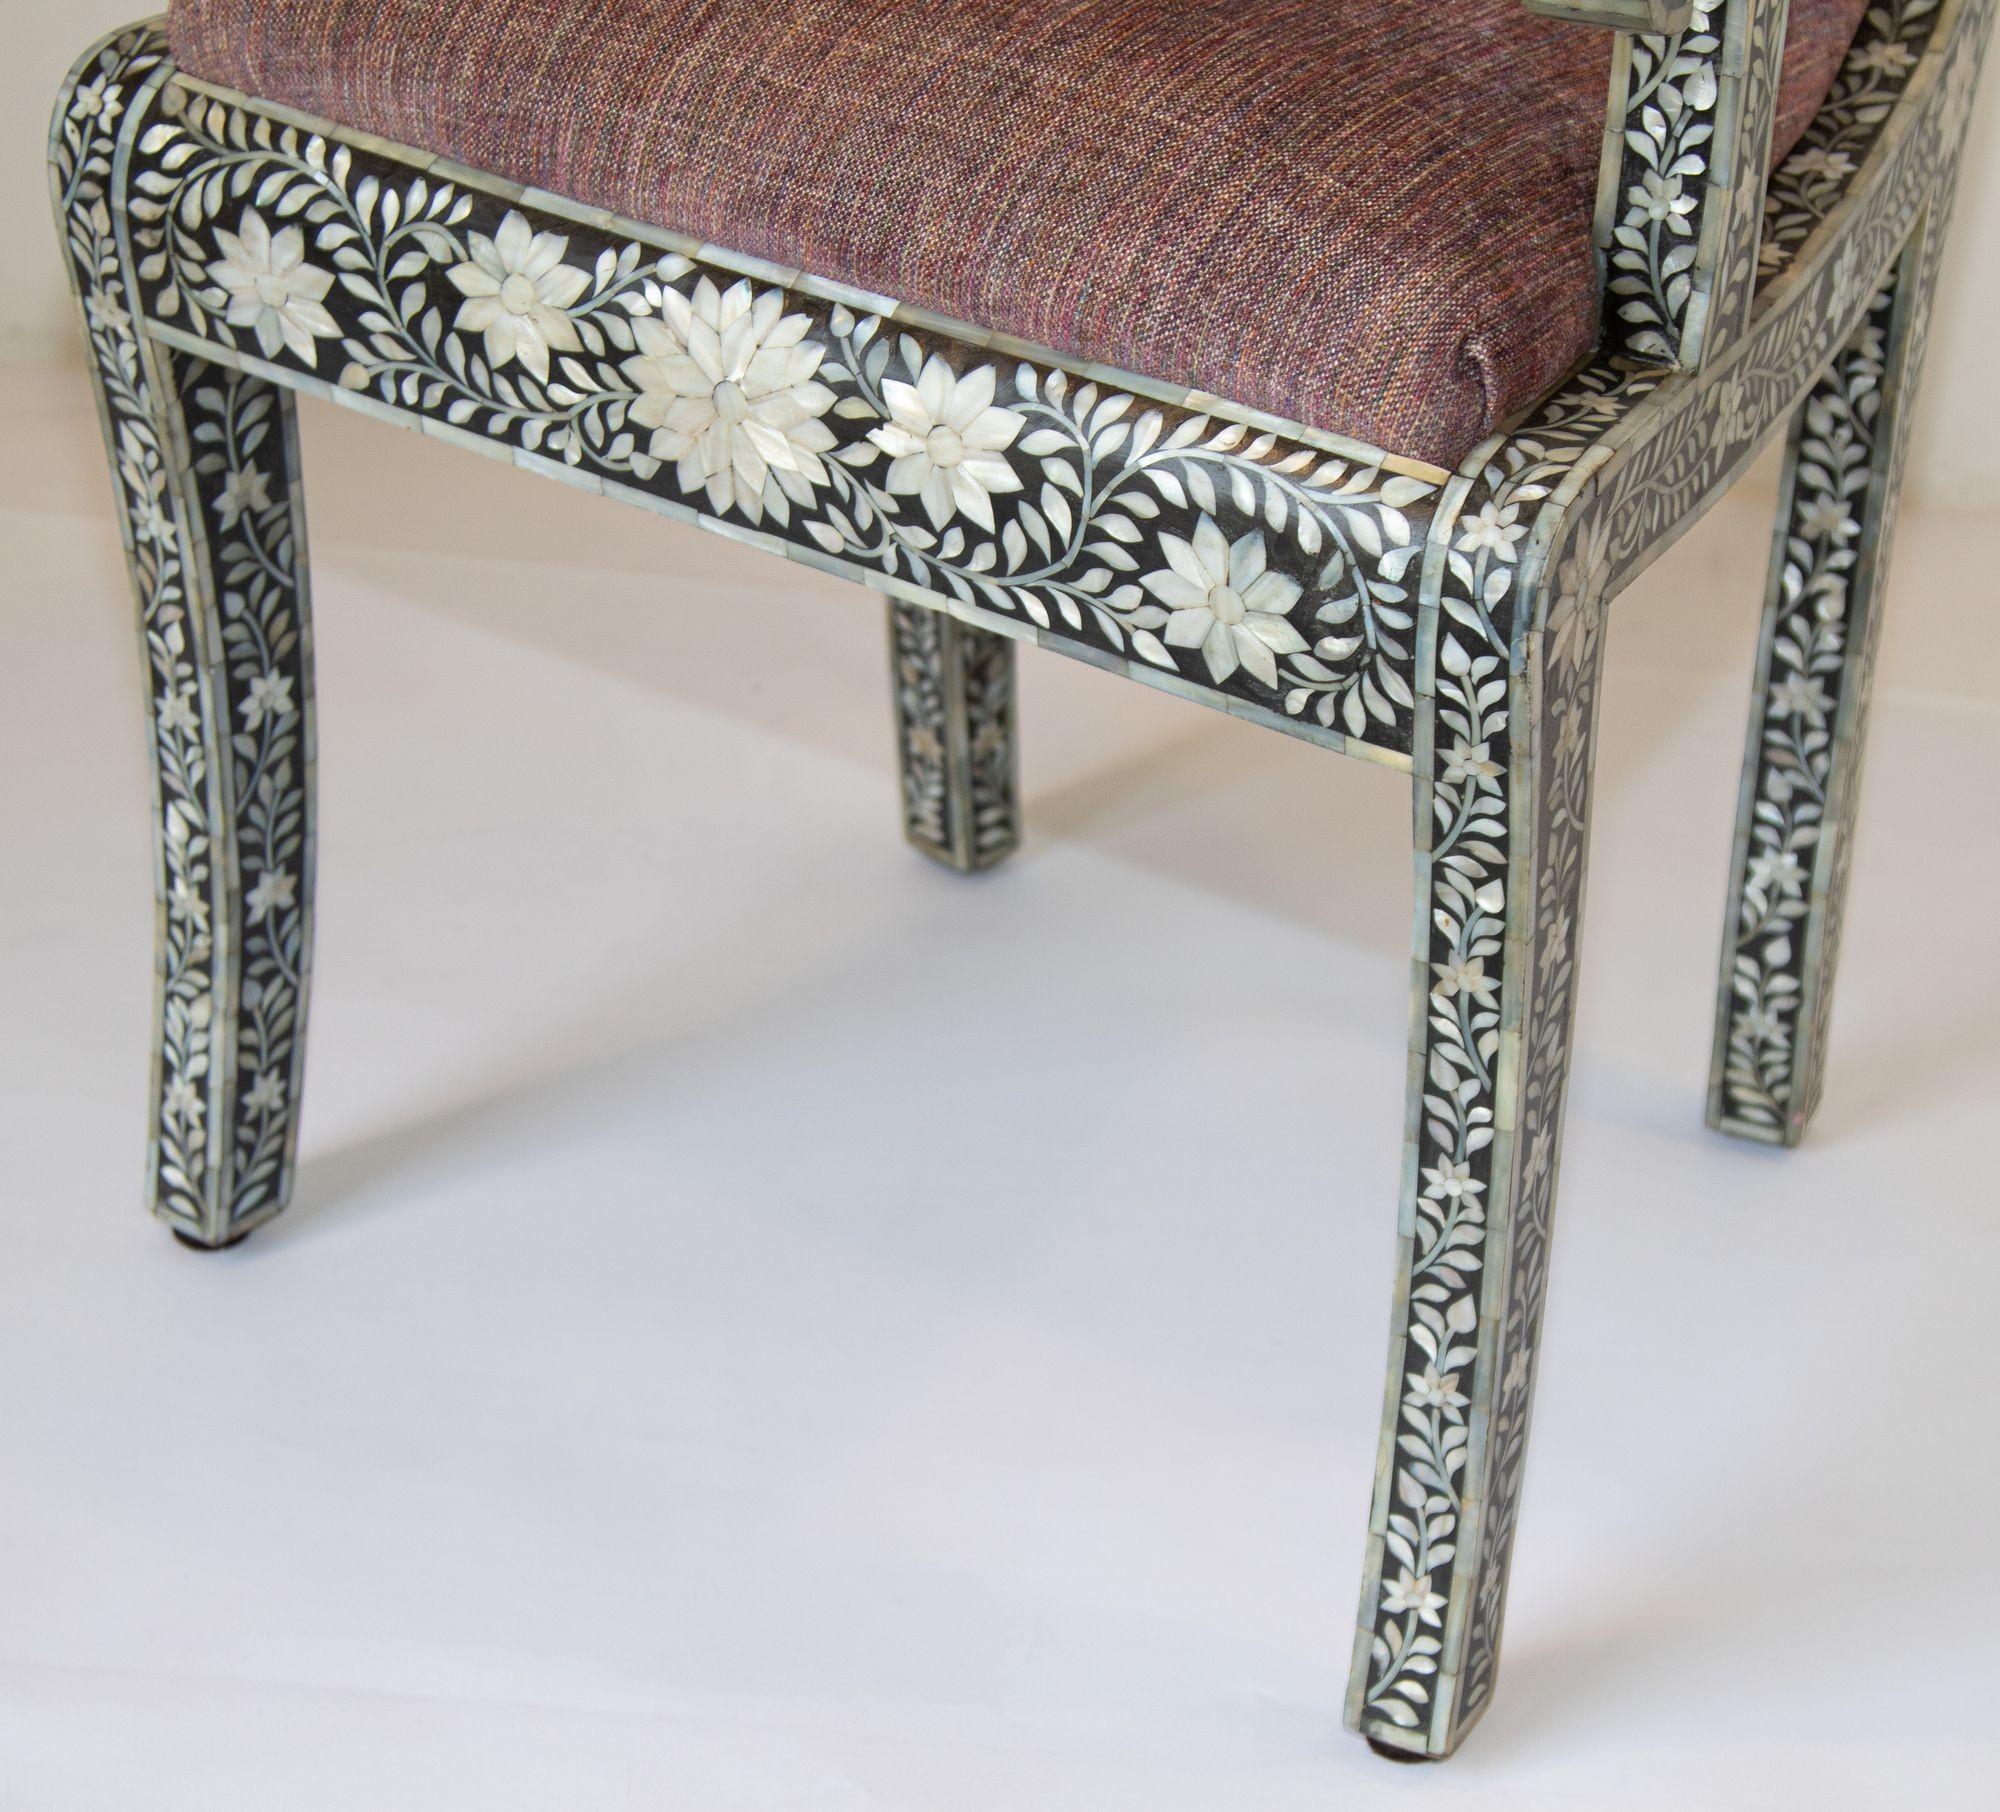 Anglo-Indian Mughal Mother of Pearl Inlaid Klismos Armchair with Ram Head 1 of 2 For Sale 12